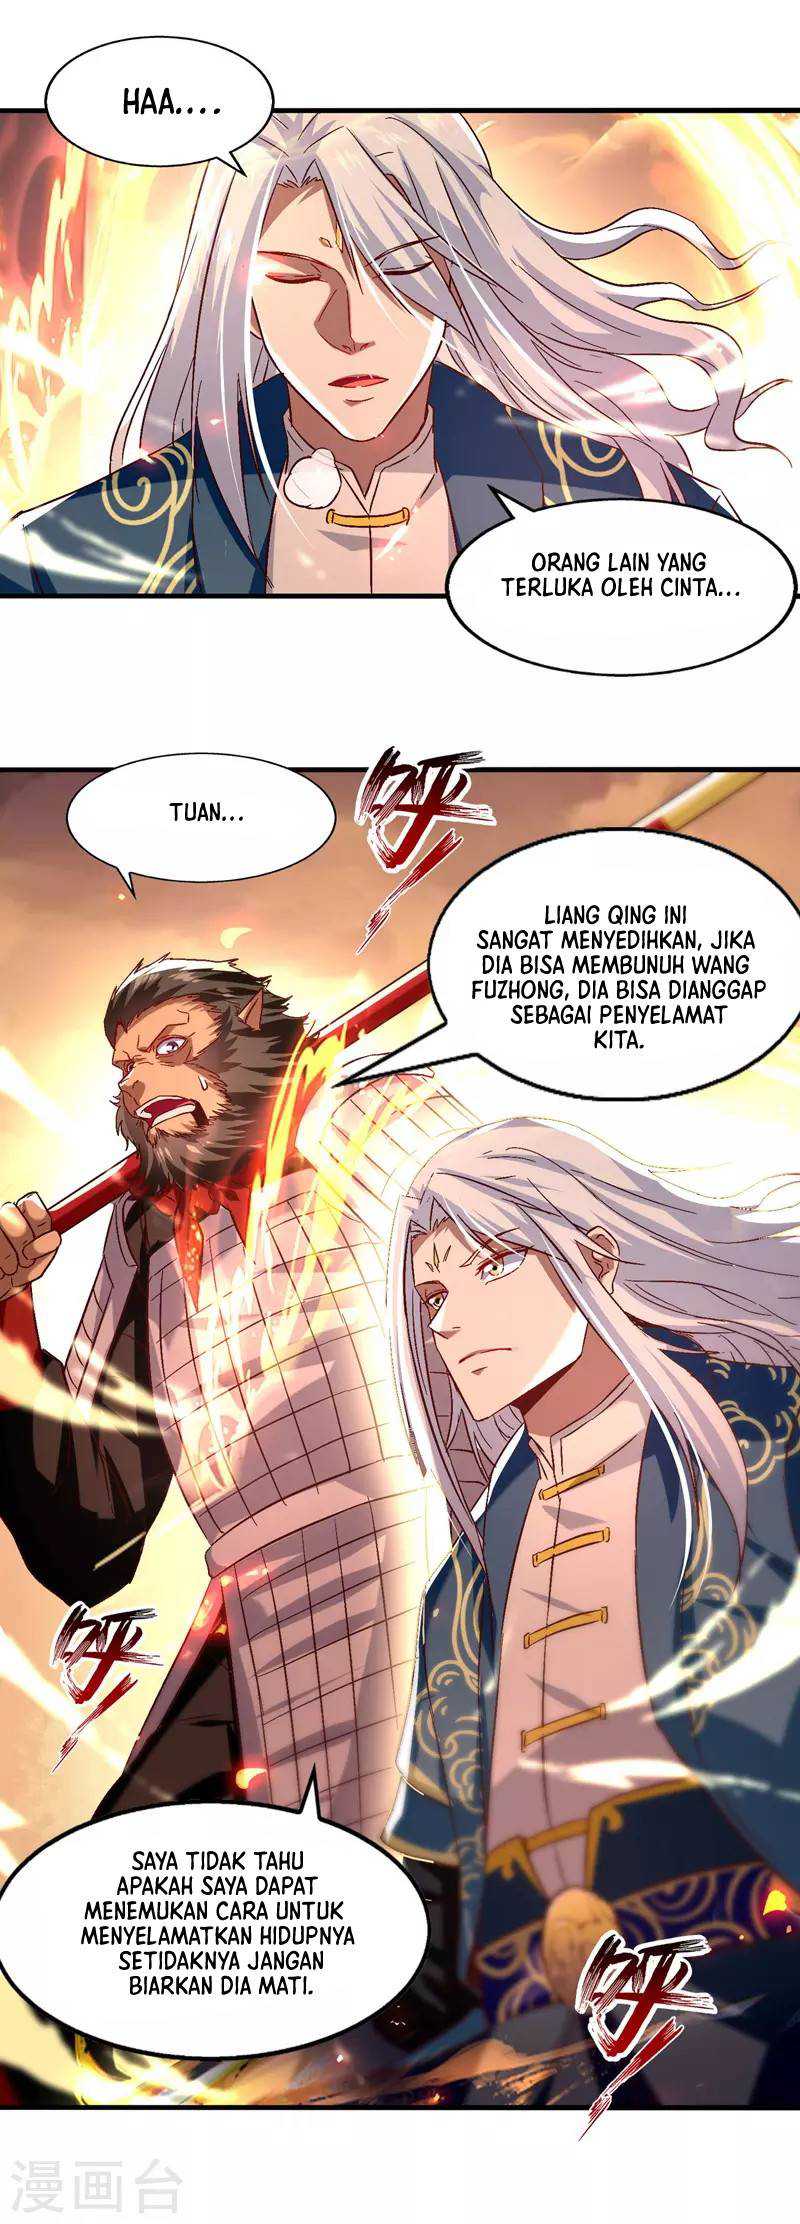 Against The Heaven Supreme (Heaven Guards) Chapter 75